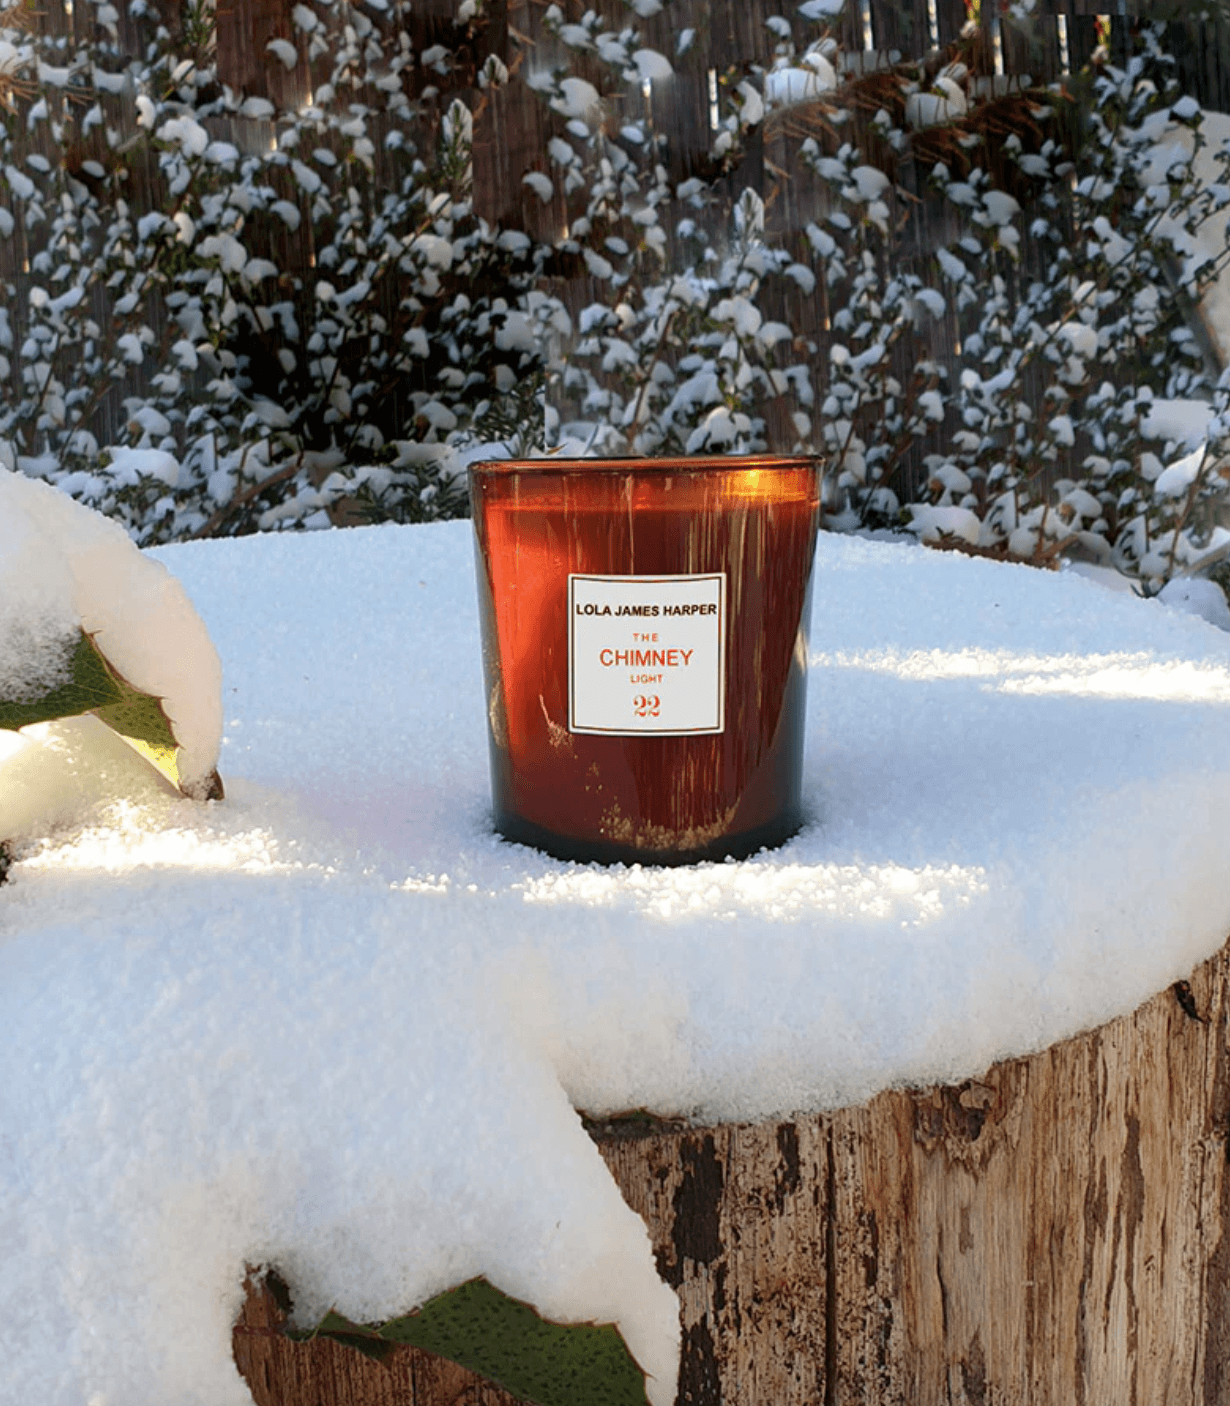 The Chimney Light Candle by Lola James Harper - Haven